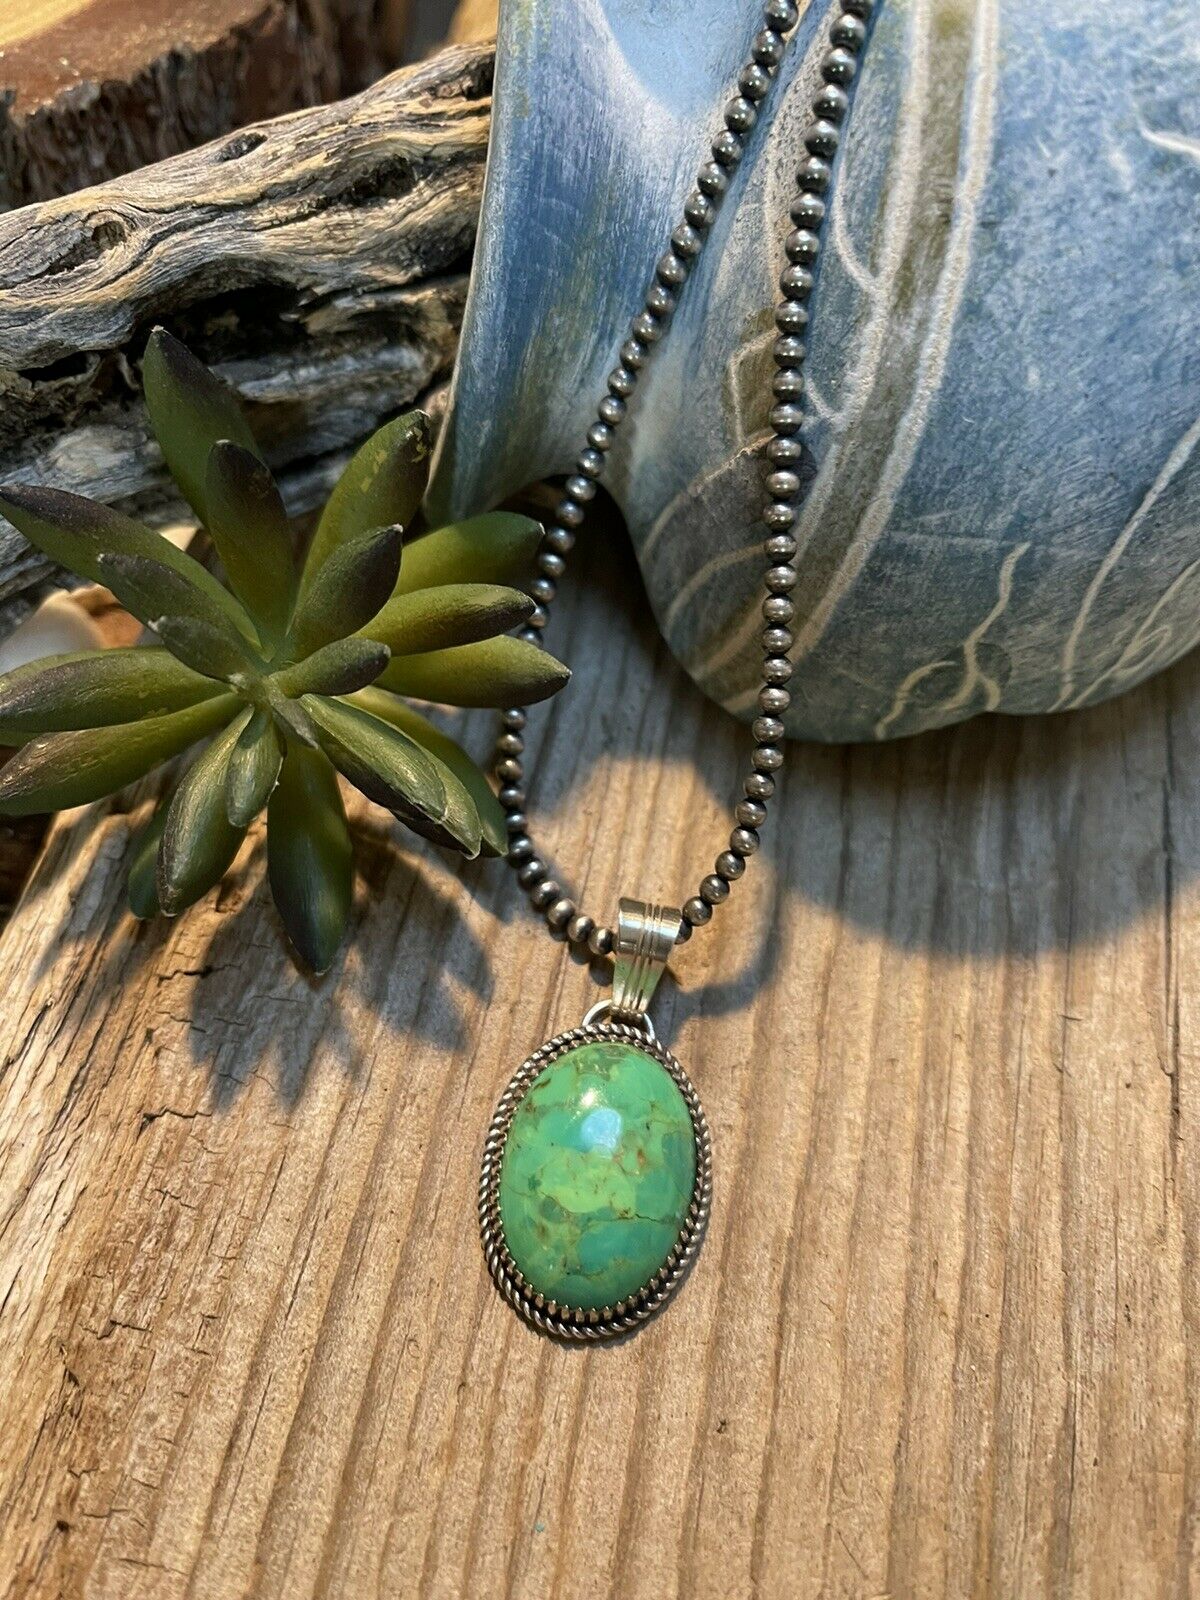 Sweet and Simple Southwest Sterling Dyed Kingman Turquoise Pendant Signed